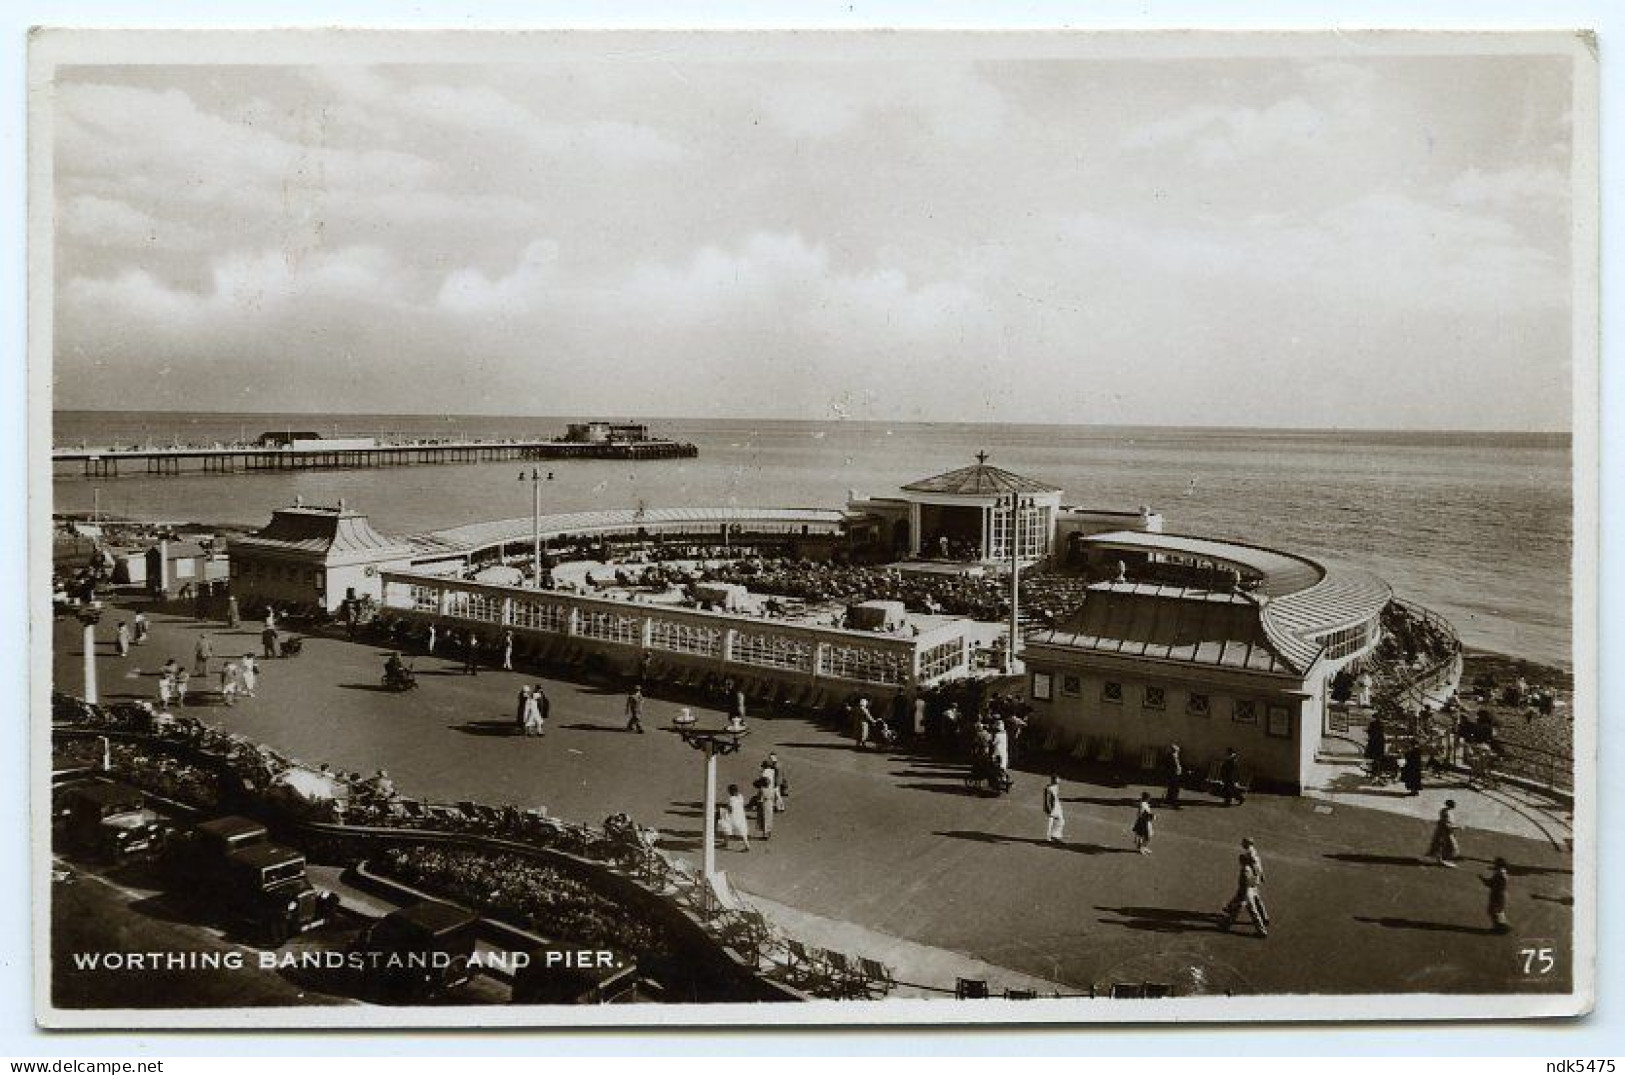 WORTHING BANDSTAND AND PIER / LONDON, WINCHMORE HILL, ORPINGTON ROAD (LING) - Worthing